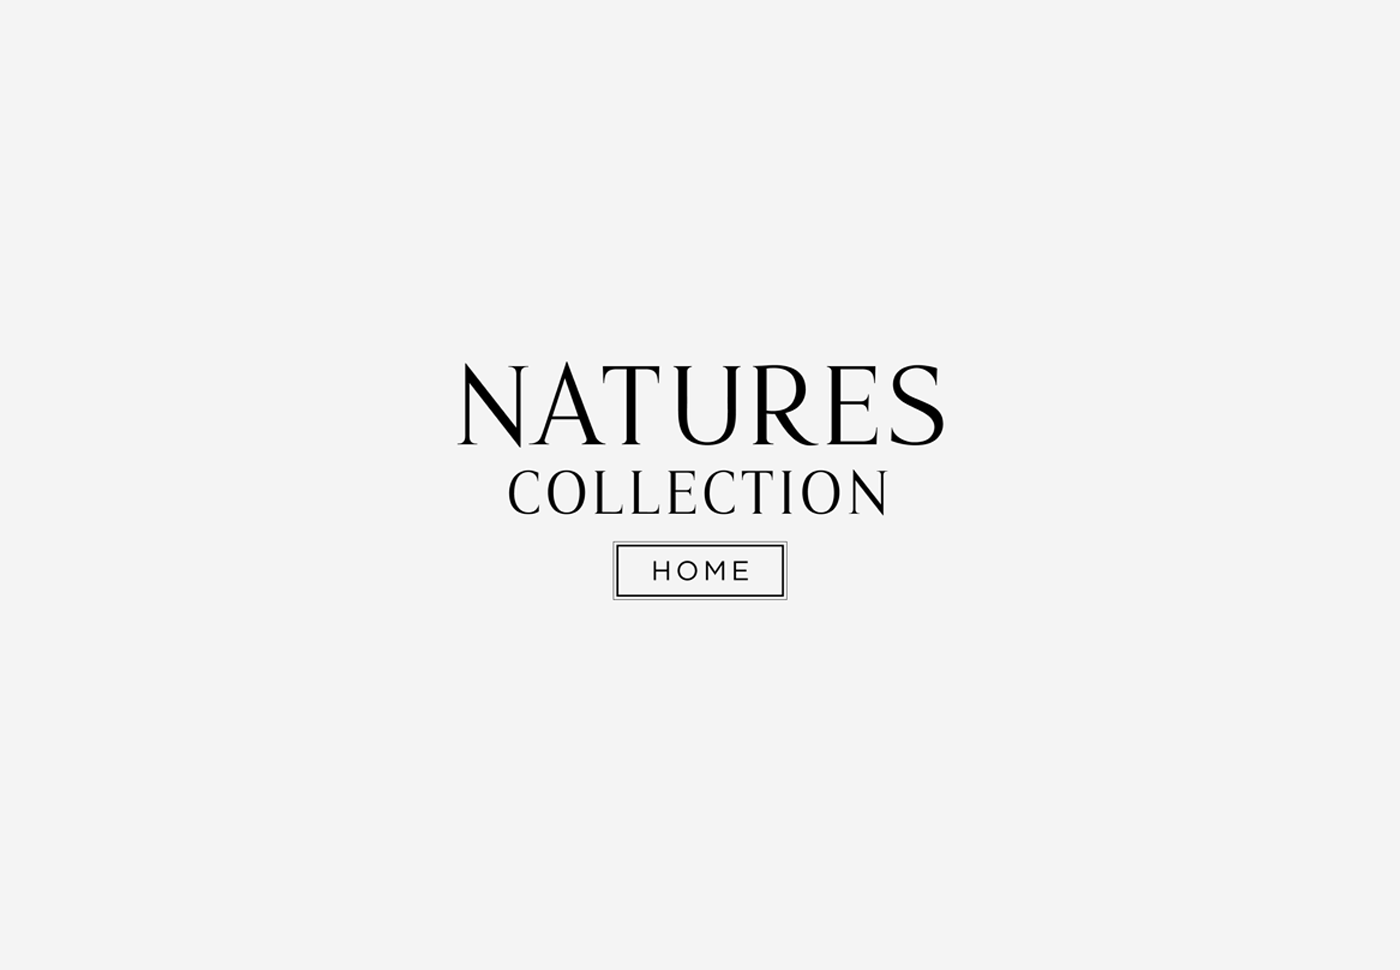 Natures Collection – Visual identity